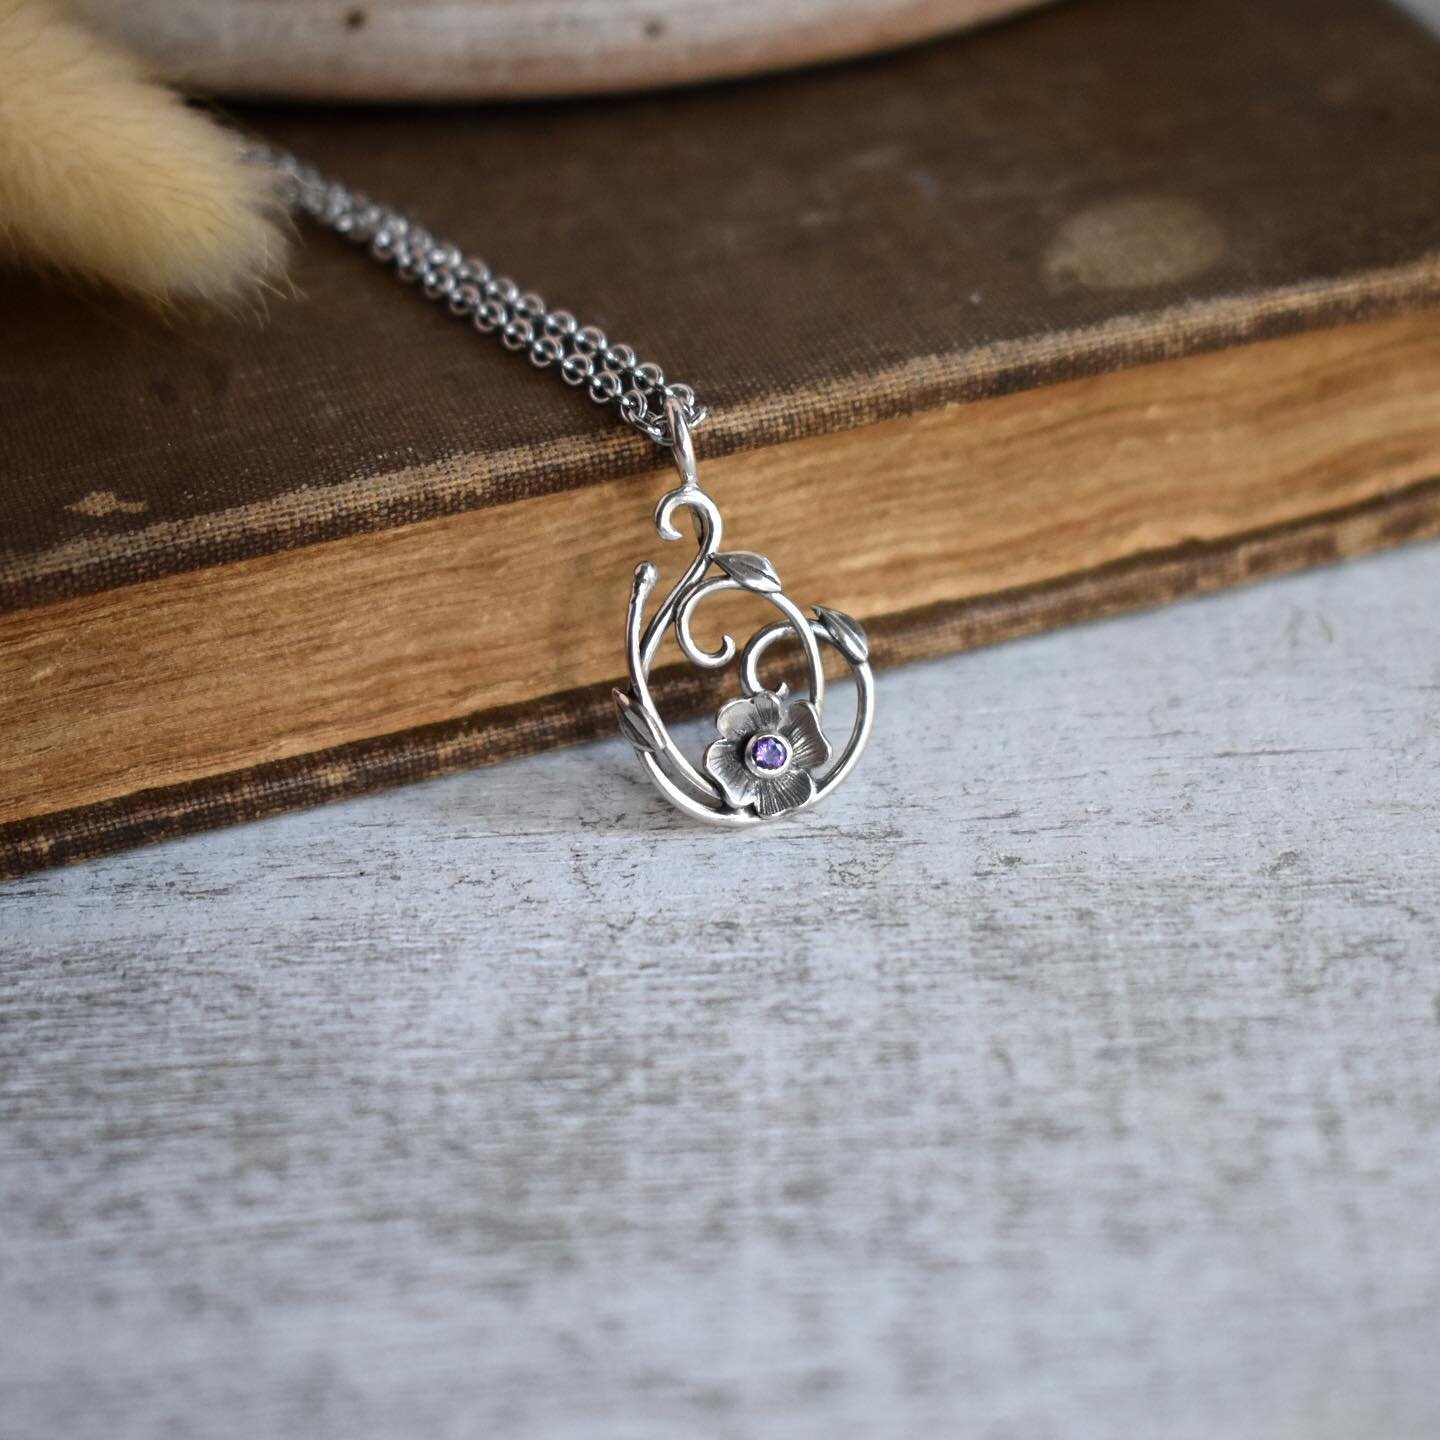 Such a pretty wee dogwood pendant! Perfect for casual outings or dressing up!